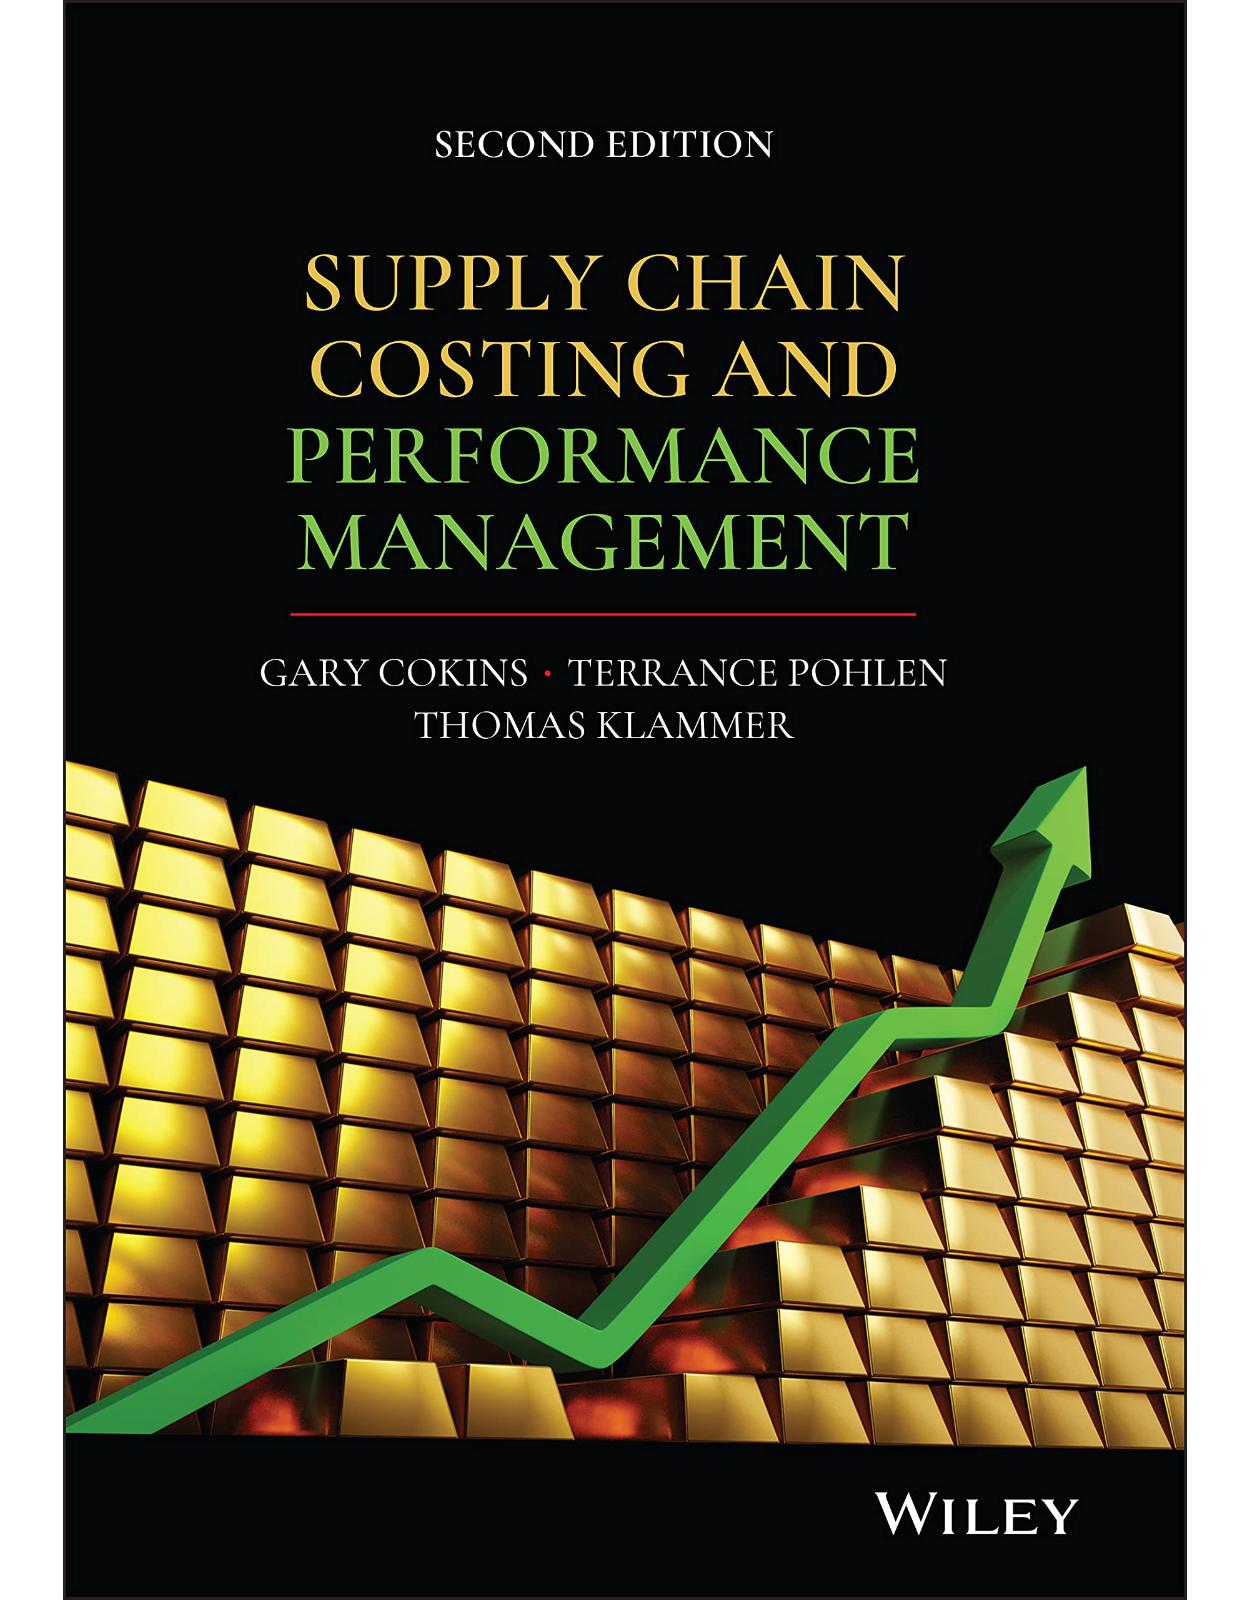 Supply Chain Costing and Performance Management